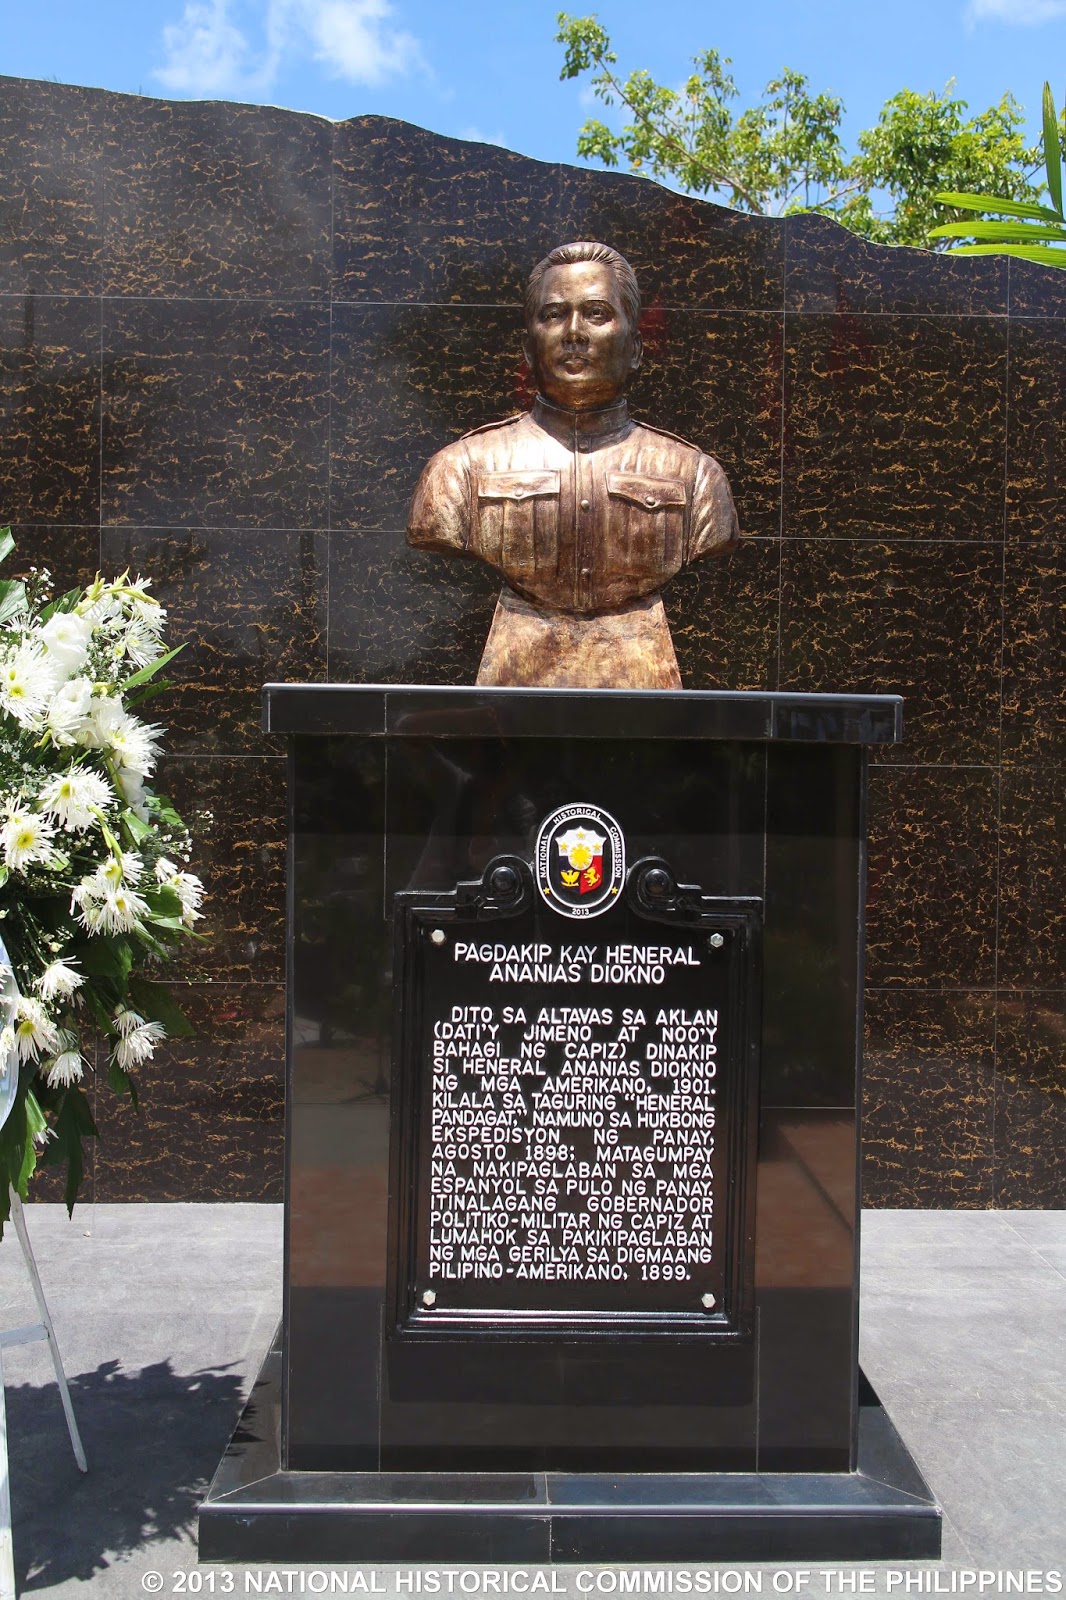 Historical Marker of General Ananias Diokno